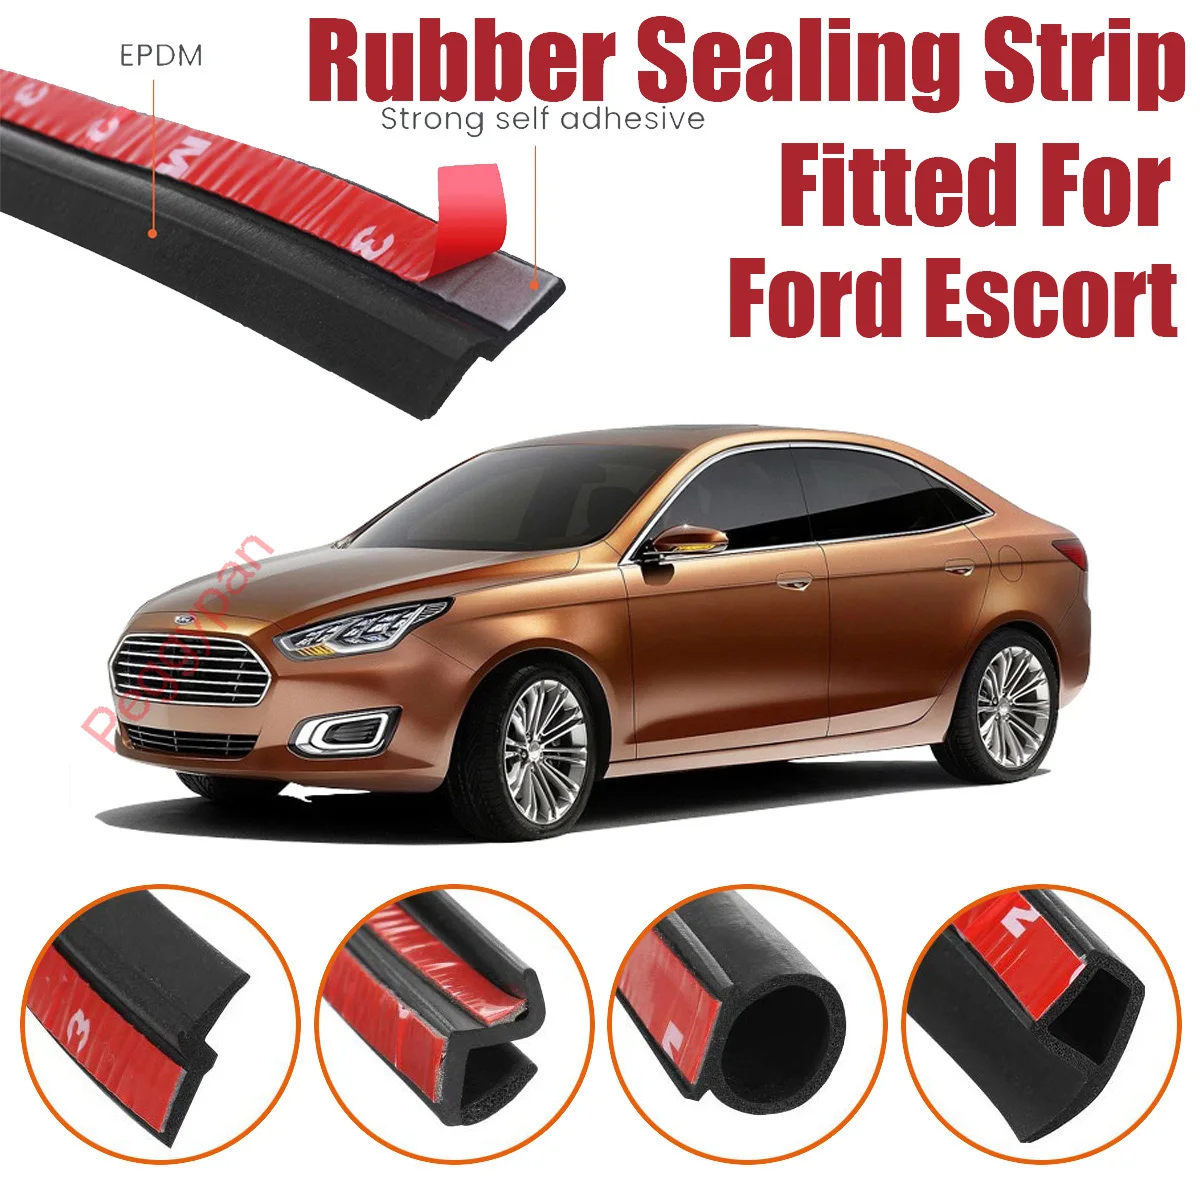 door-seal-strip-kit-self-adhesive-window-engine-cover-soundproof-rubber-weather-draft-wind-noise-reduction-fit-for-ford-escort